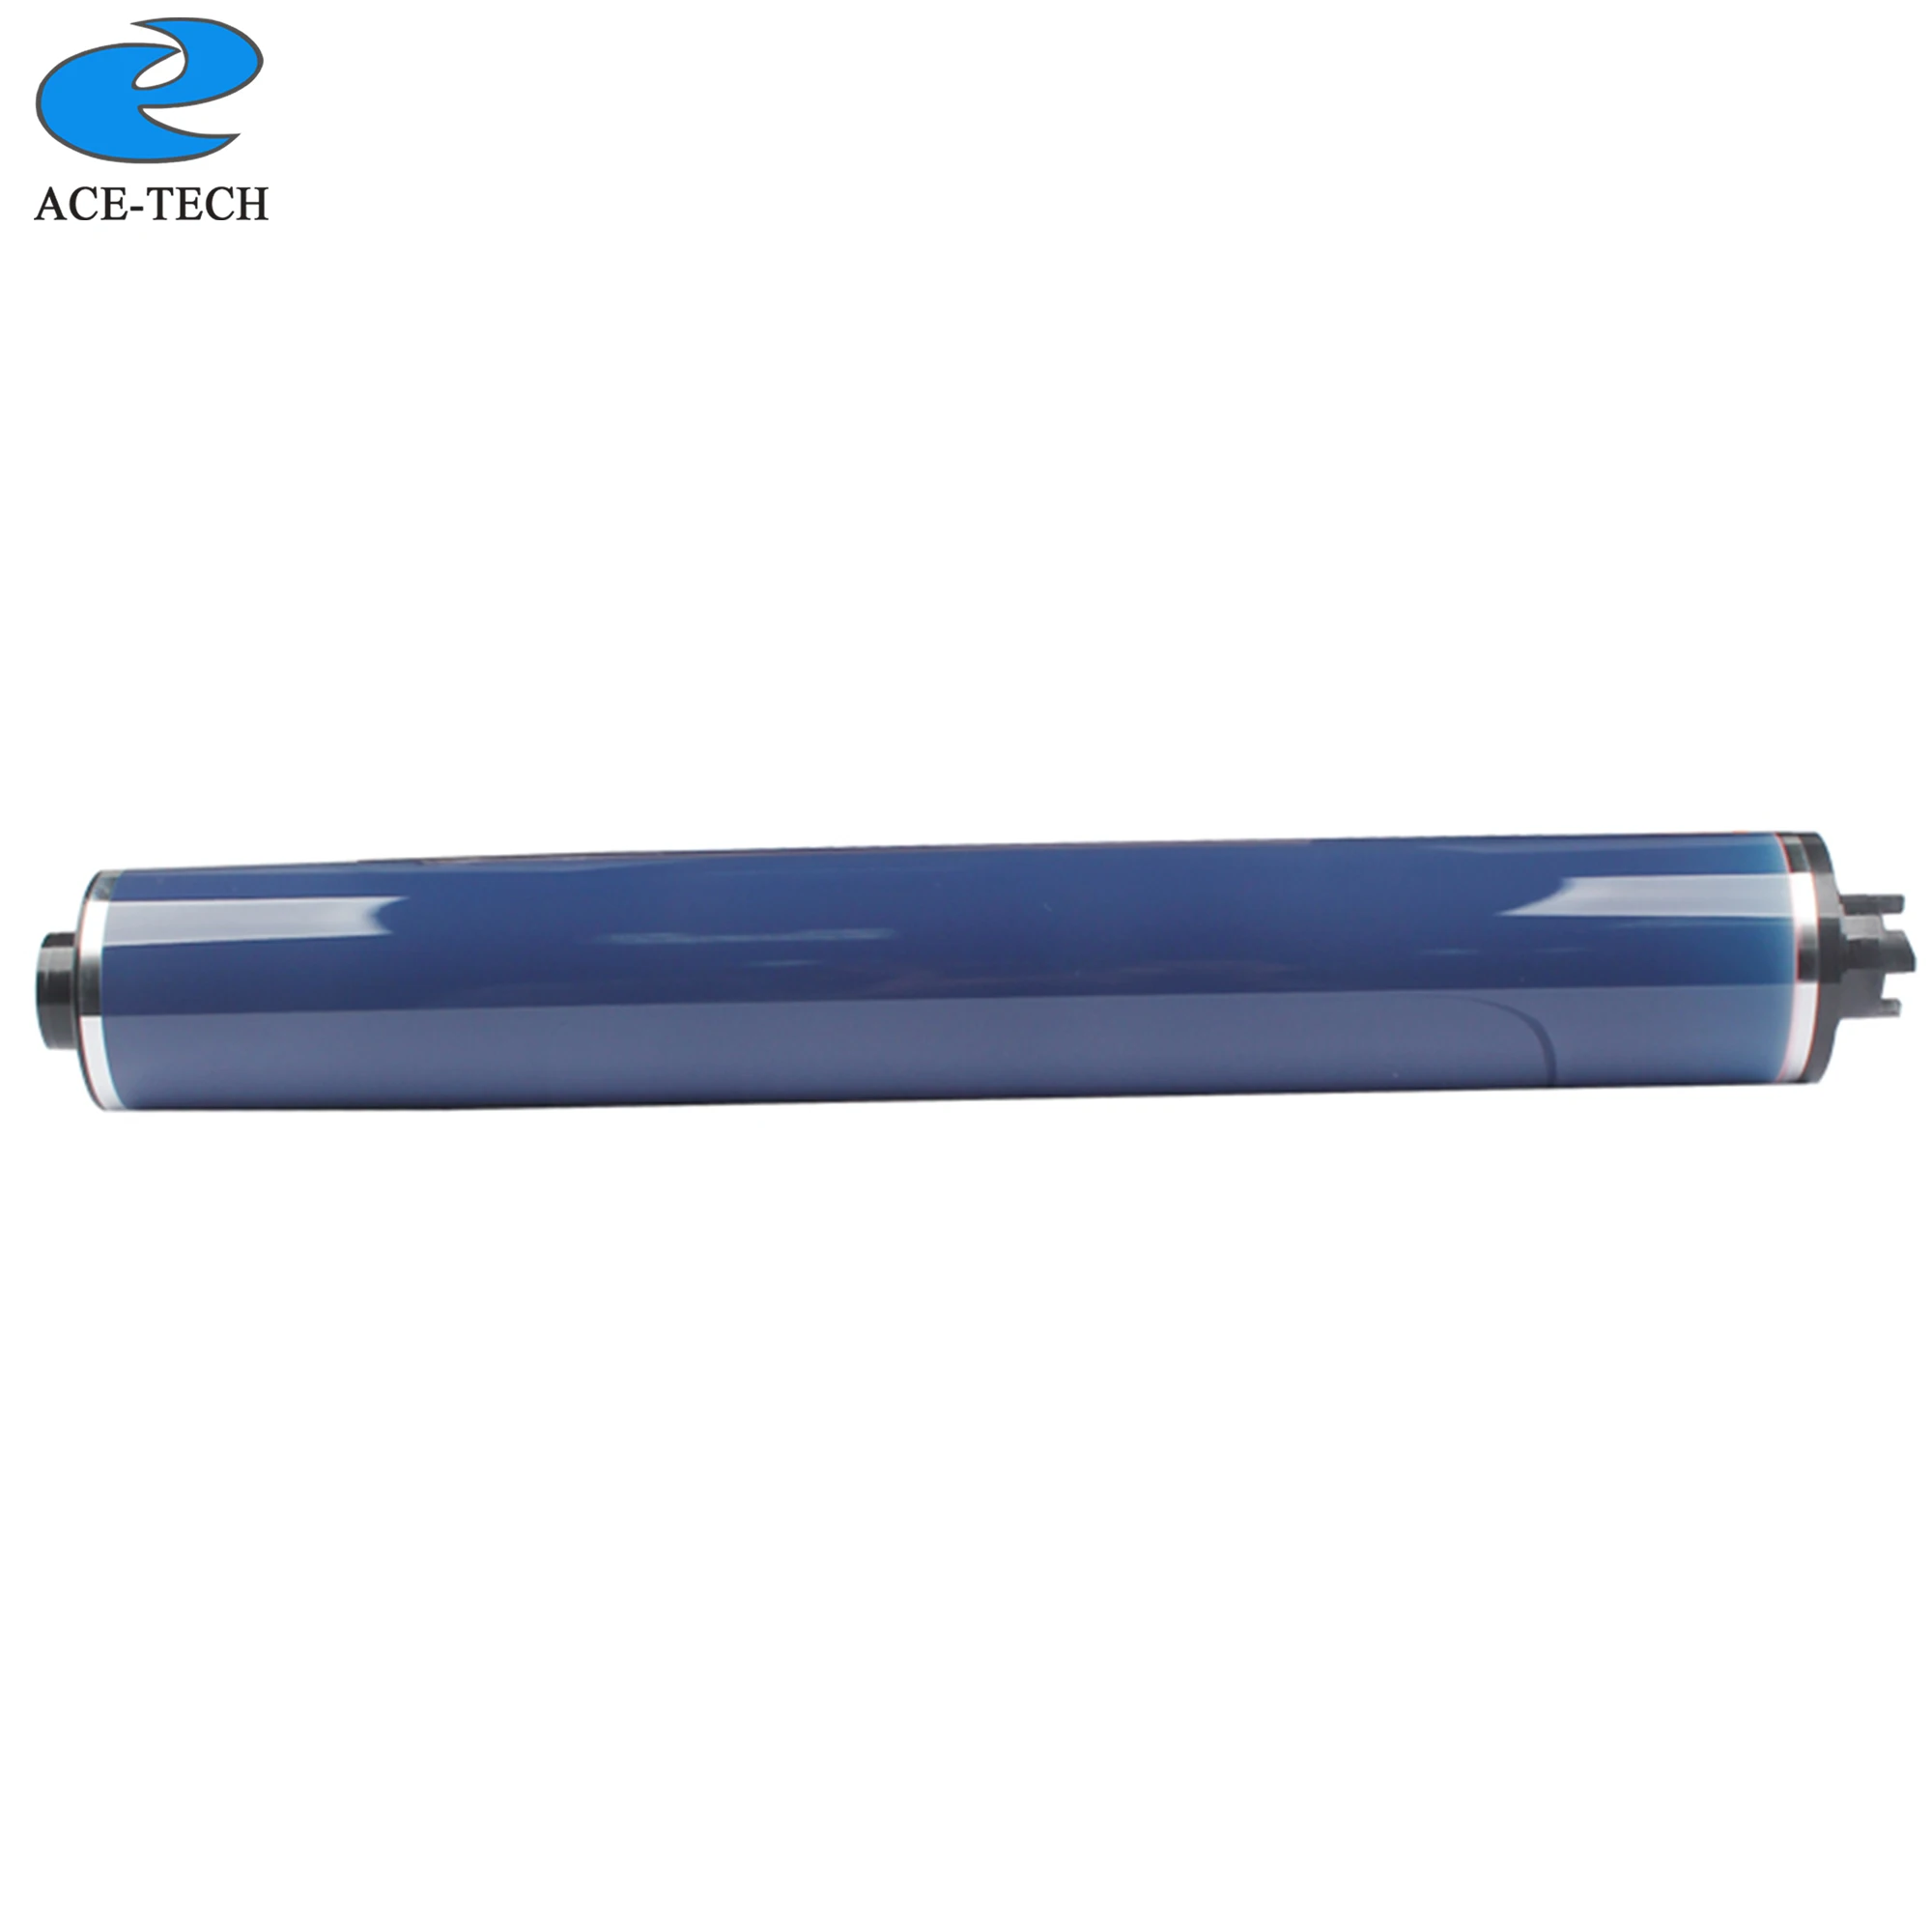 

Cmpatible Phaser7500 Long Life OPC Drum Apply to Xerox DP-C2250 2255 2270 3360 3370 4470 Printer Accessories